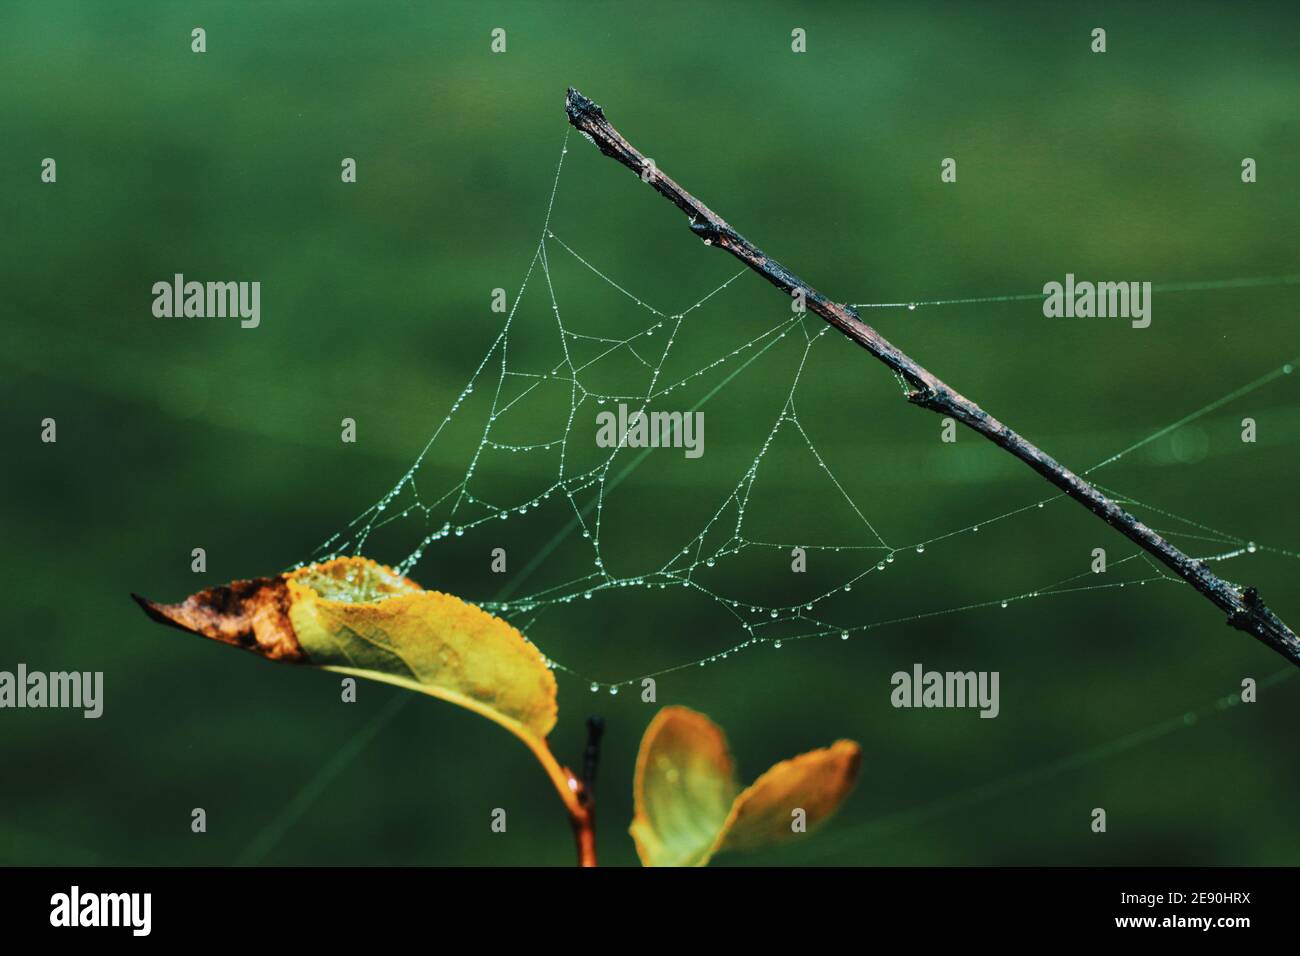 Spider web with morning dew waterdrops  stuck to the branch and leaves on the grassy background Stock Photo